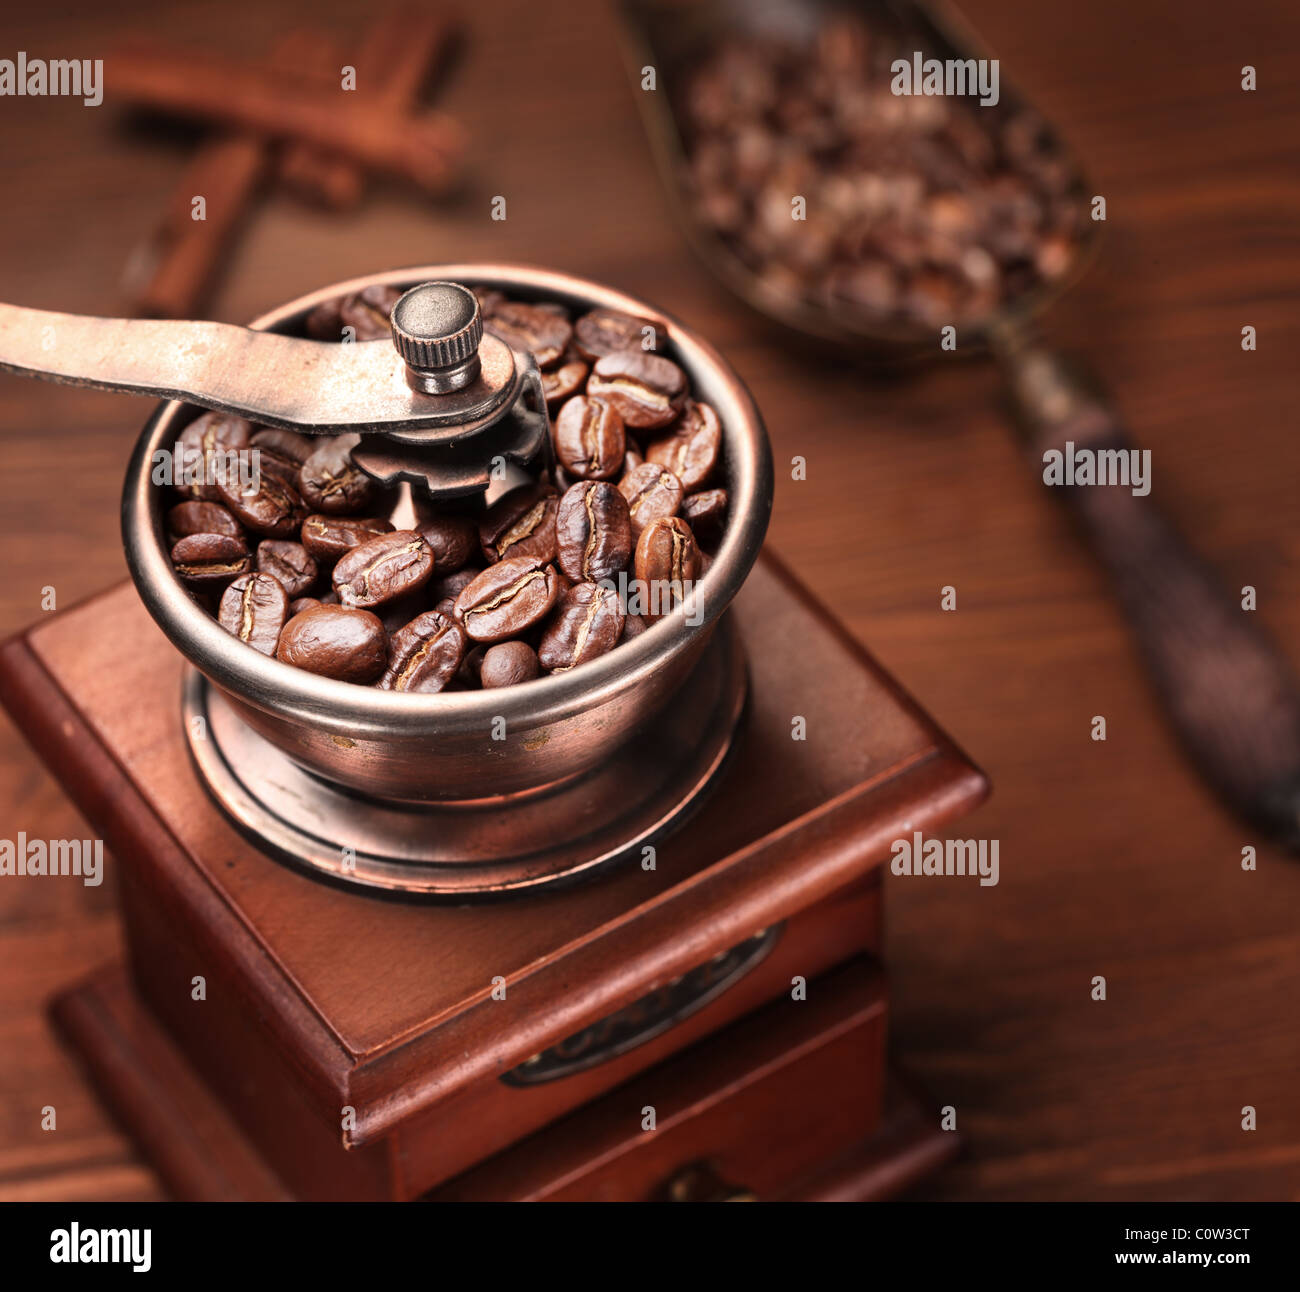 Roasted coffee beans are ground in a coffee grinder. Stock Photo